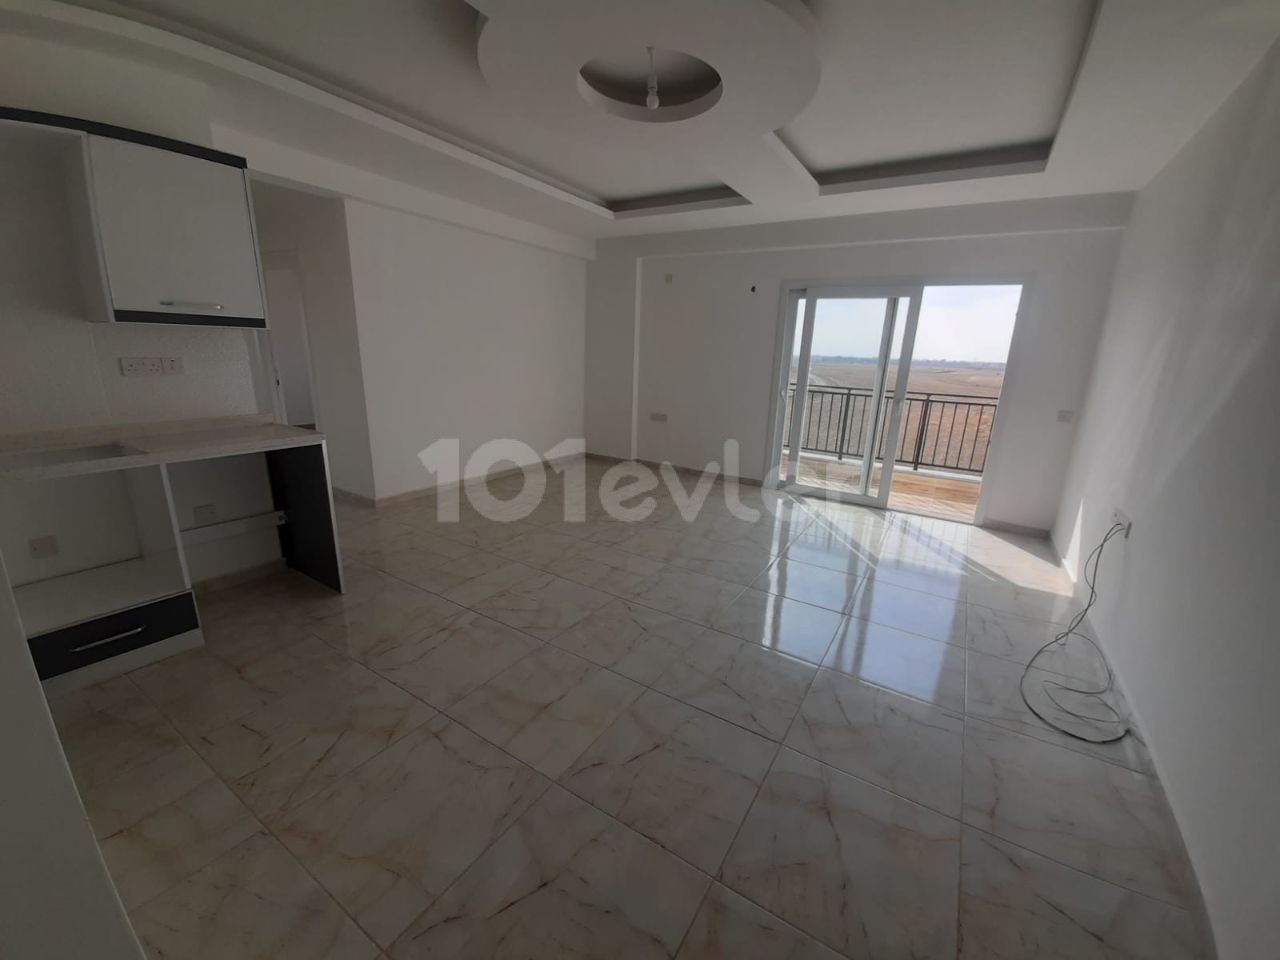 2+1 flats for sale in iskele long beach unfurnished flats 85 square meters 130.000 STG WALKING DISTANCE TO THE SEA QUALITY WORKMANSHIP 3rd floor flat is at the back.